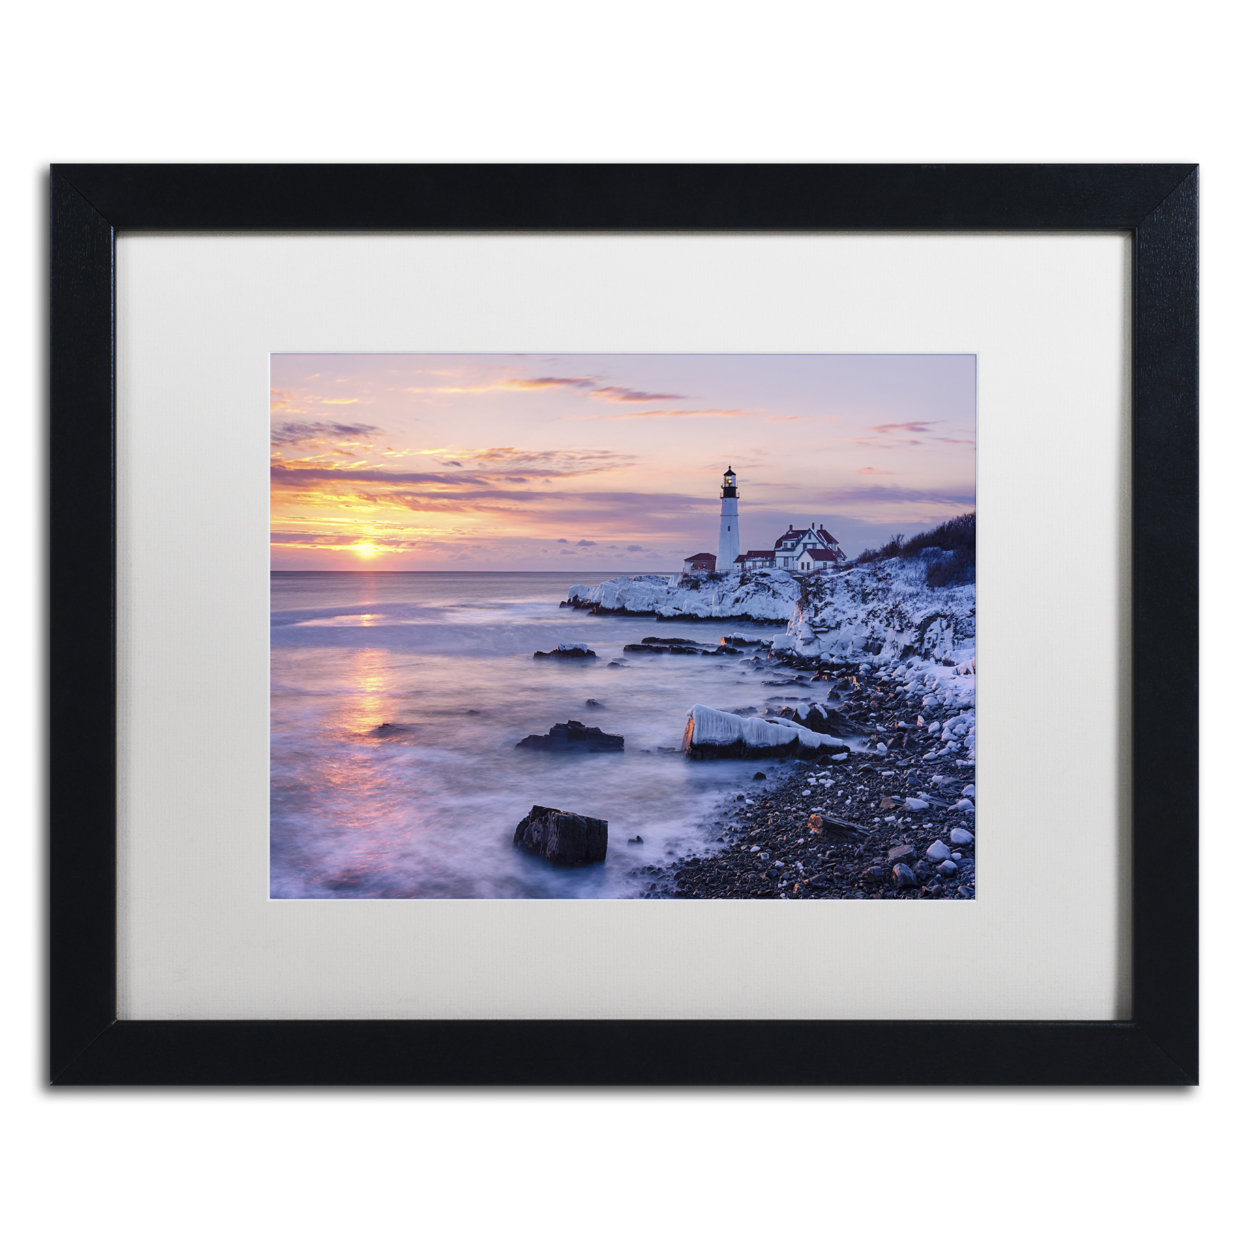 Michael Blanchette Photography 'Winter Lights' Black Wooden Framed Art 18 X 22 Inches